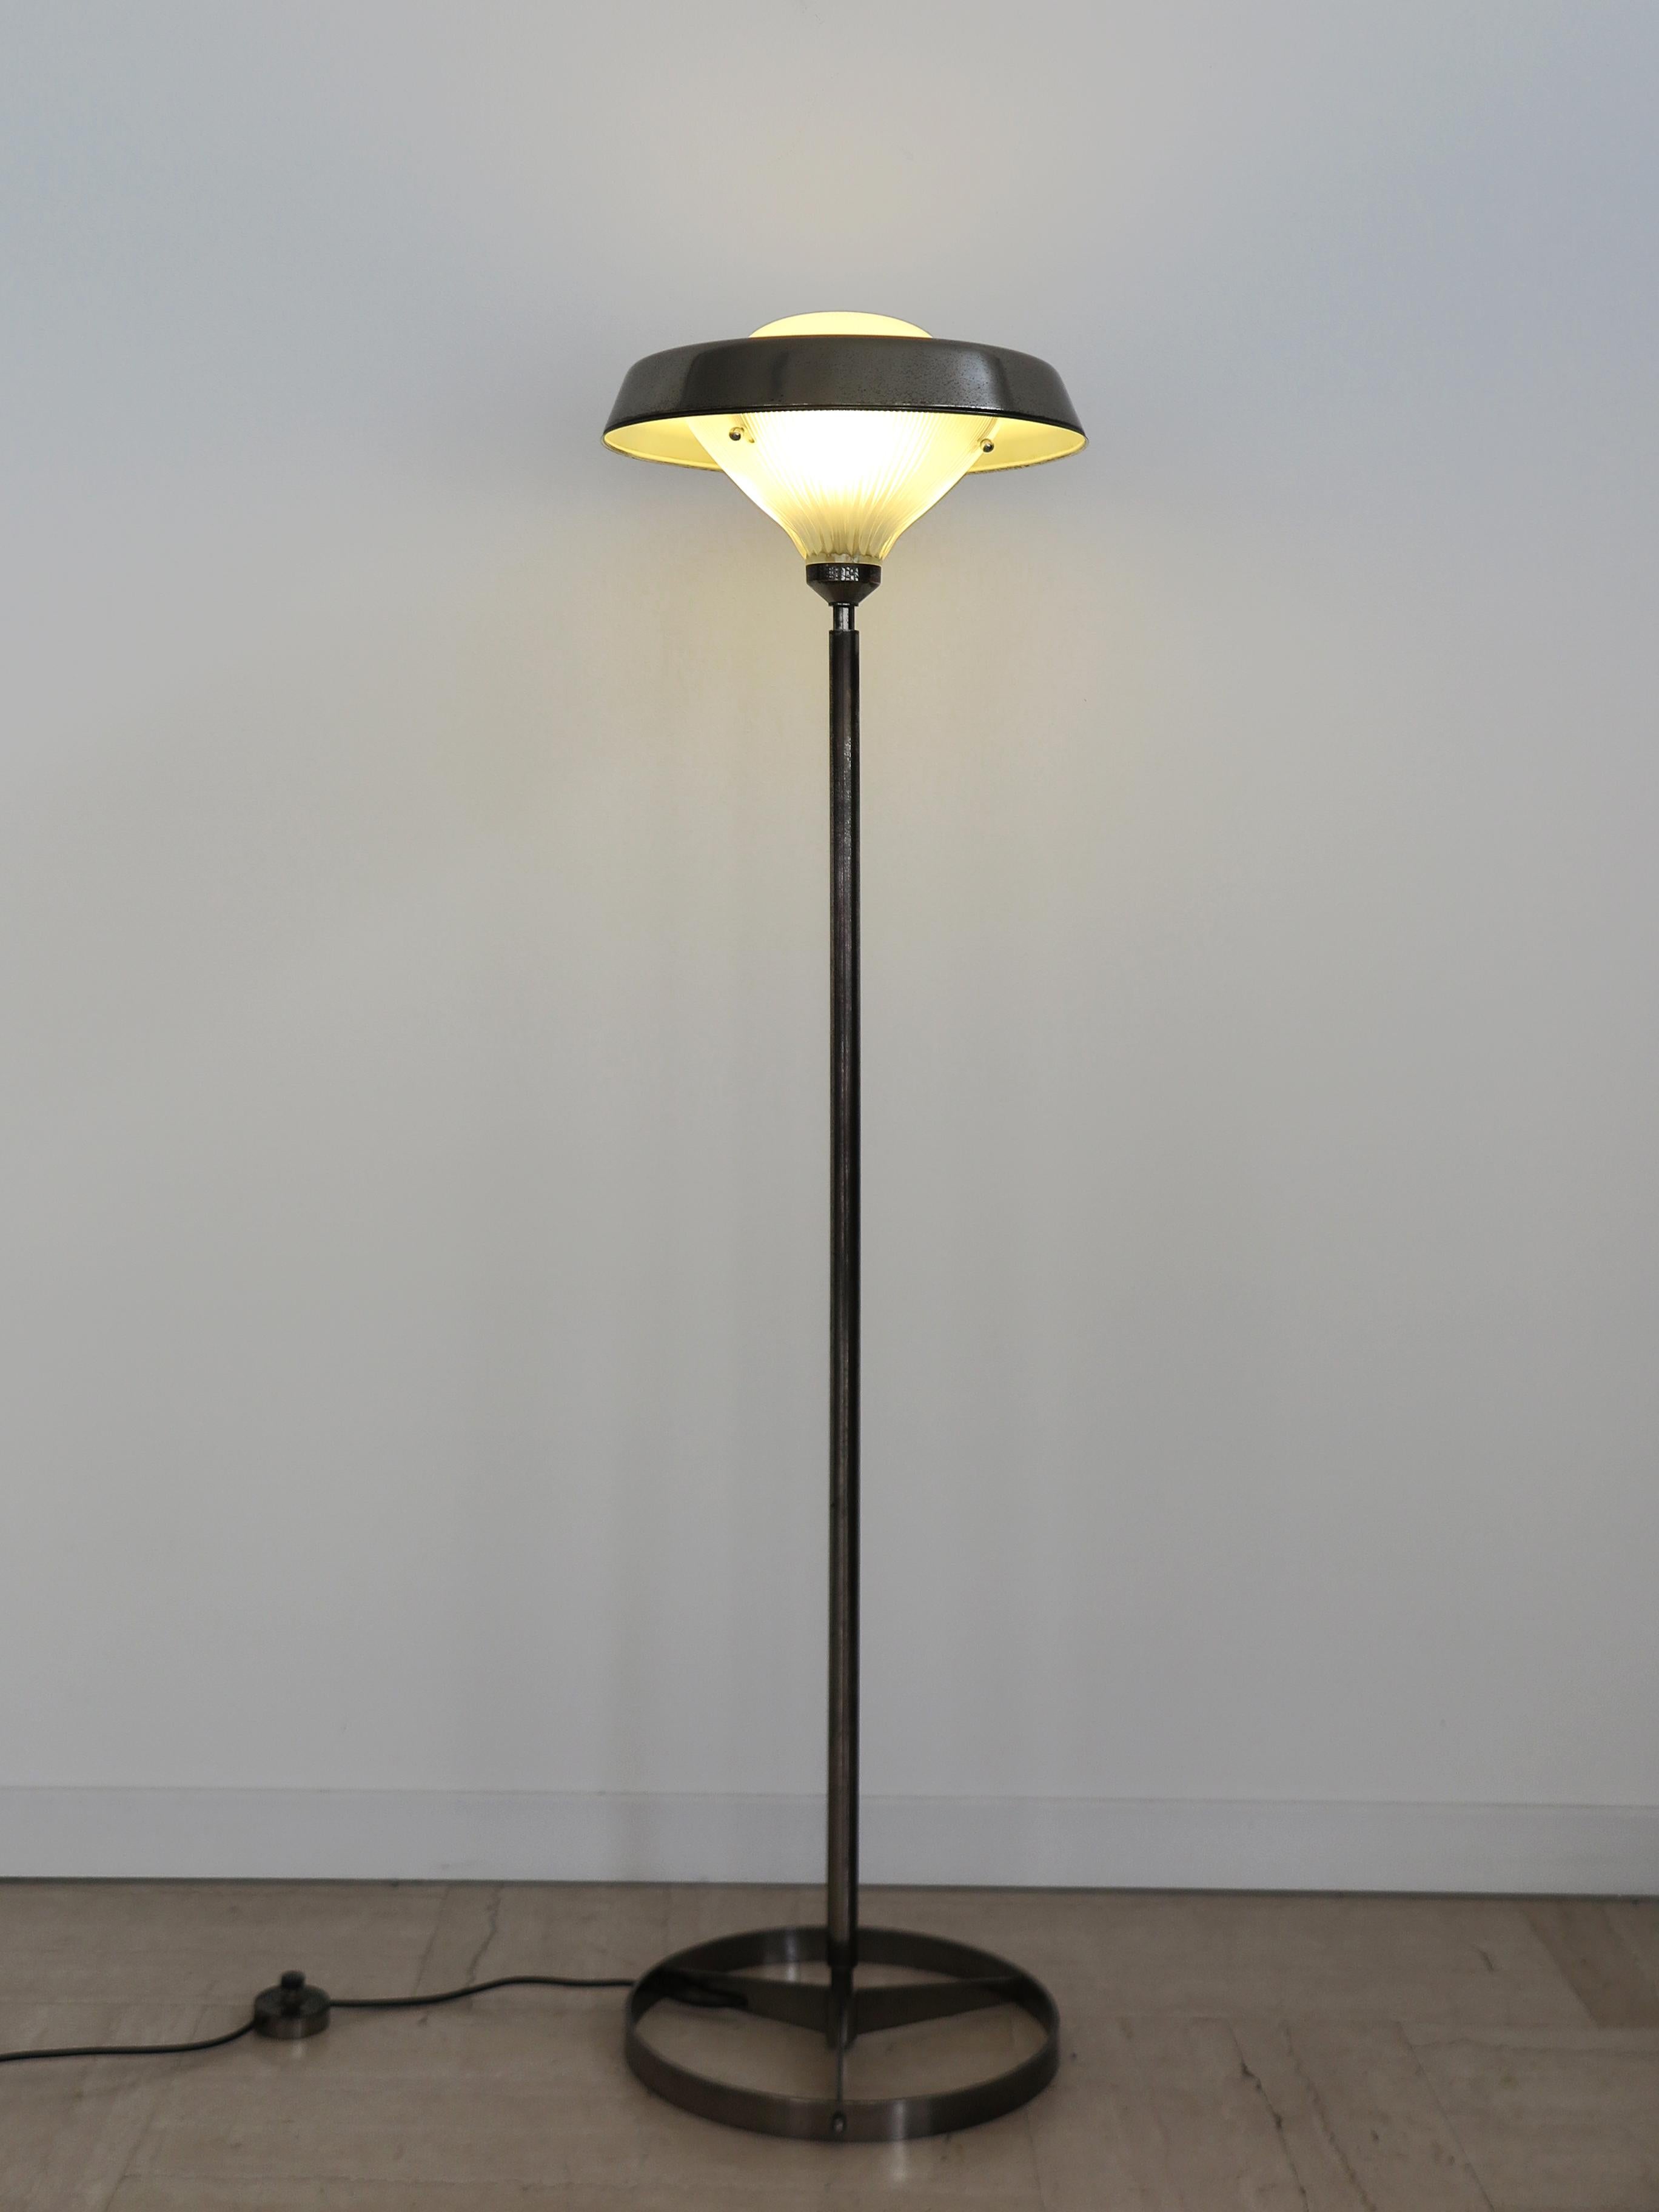 Italian midcentury modern design floor lamp model ‘Ro’ designed by architects Belgiojoso, Peressutti and Rogers of Studio BBPR and produced by Artemide since 1963 with burnished brass frame and pressed glass diffusers, Italy